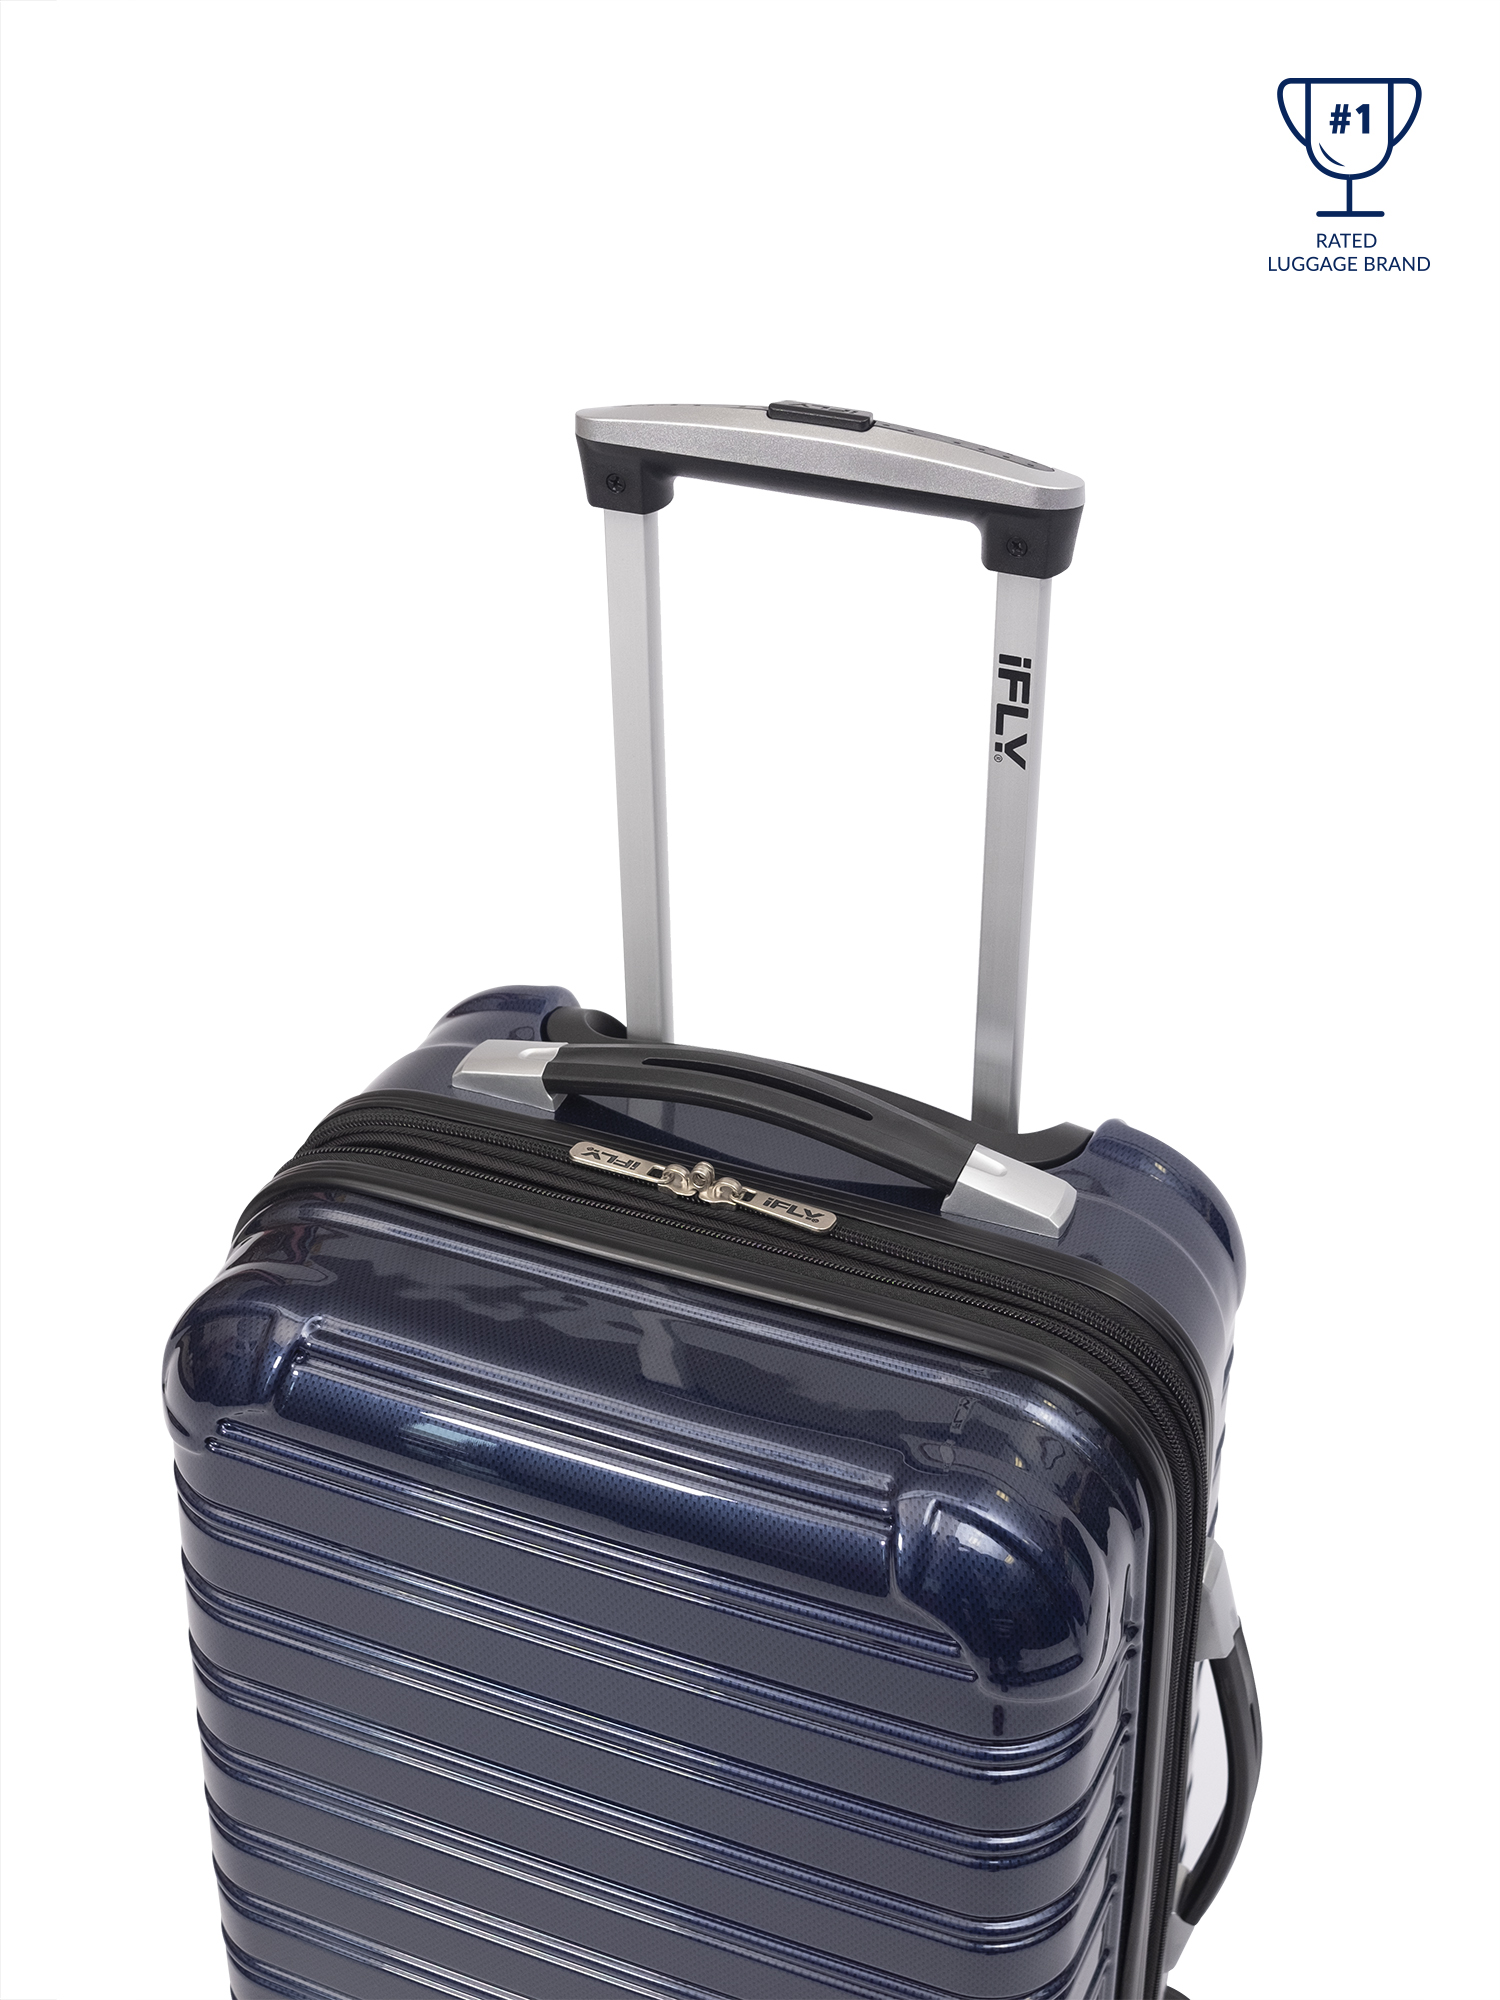 iFLY Online Exclusive Hard Sided Luggage Fibertech 20" & Travel Case - image 2 of 9